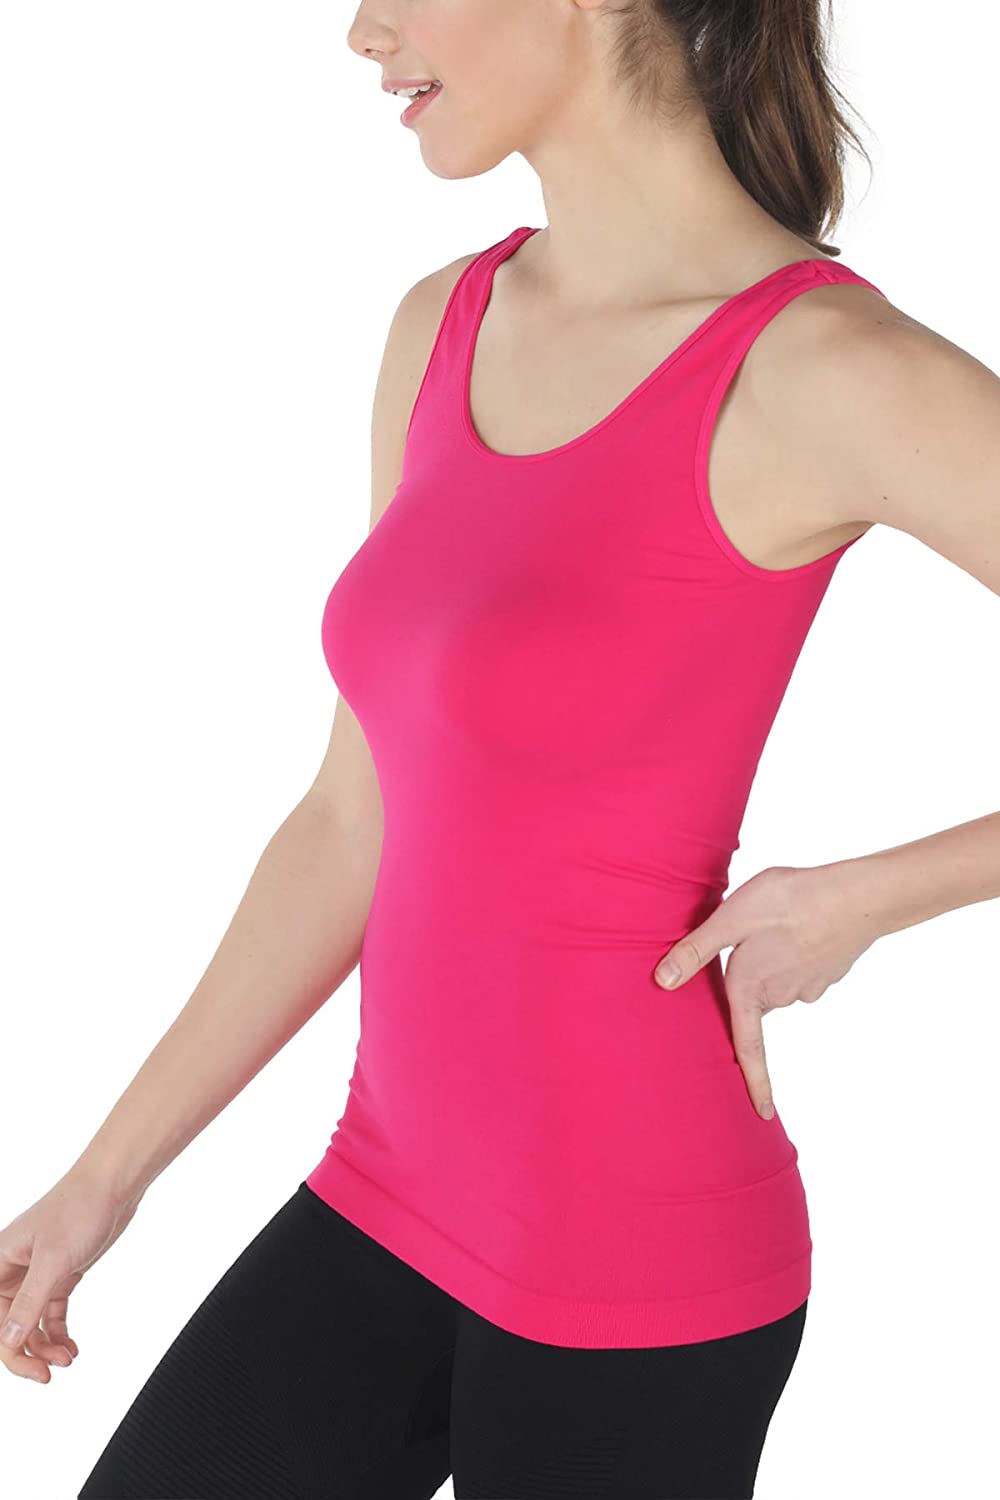 Buy The Blazze Women's Basic Cami Camisole Stretchy Spaghetti Strap Tank  Top Online at Low Prices in India 